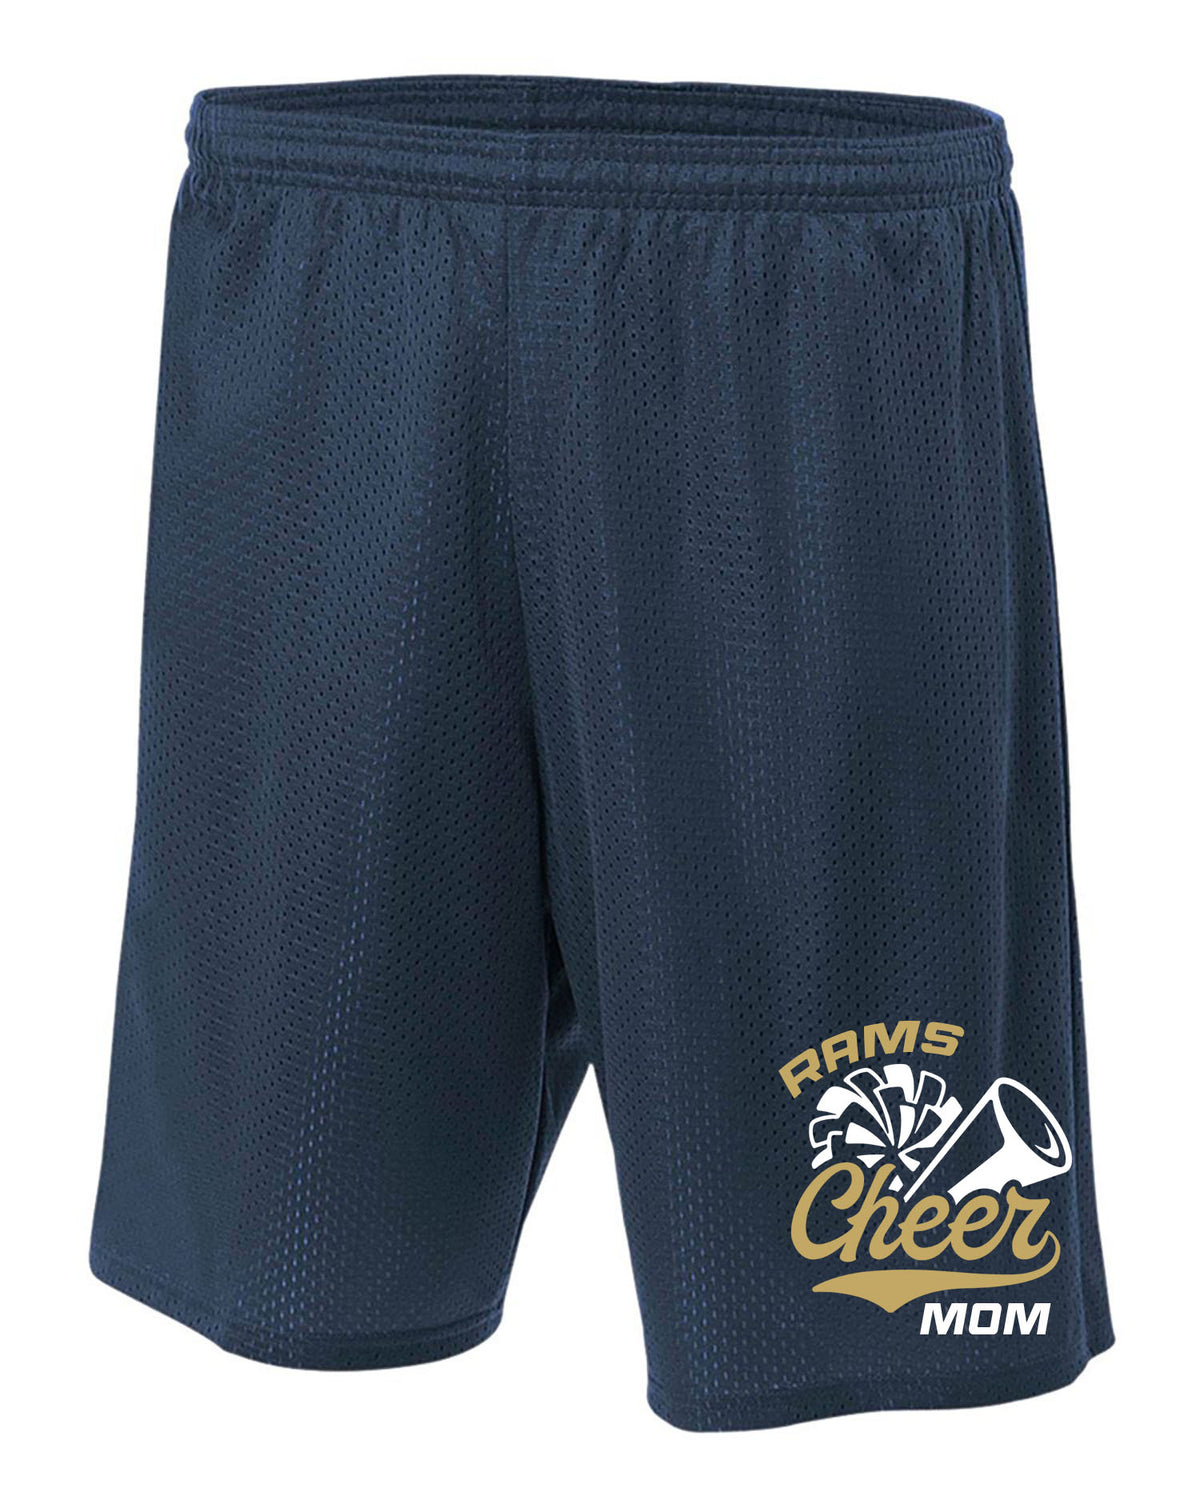 Sussex Middle Cheer Design 1 Mesh Shorts